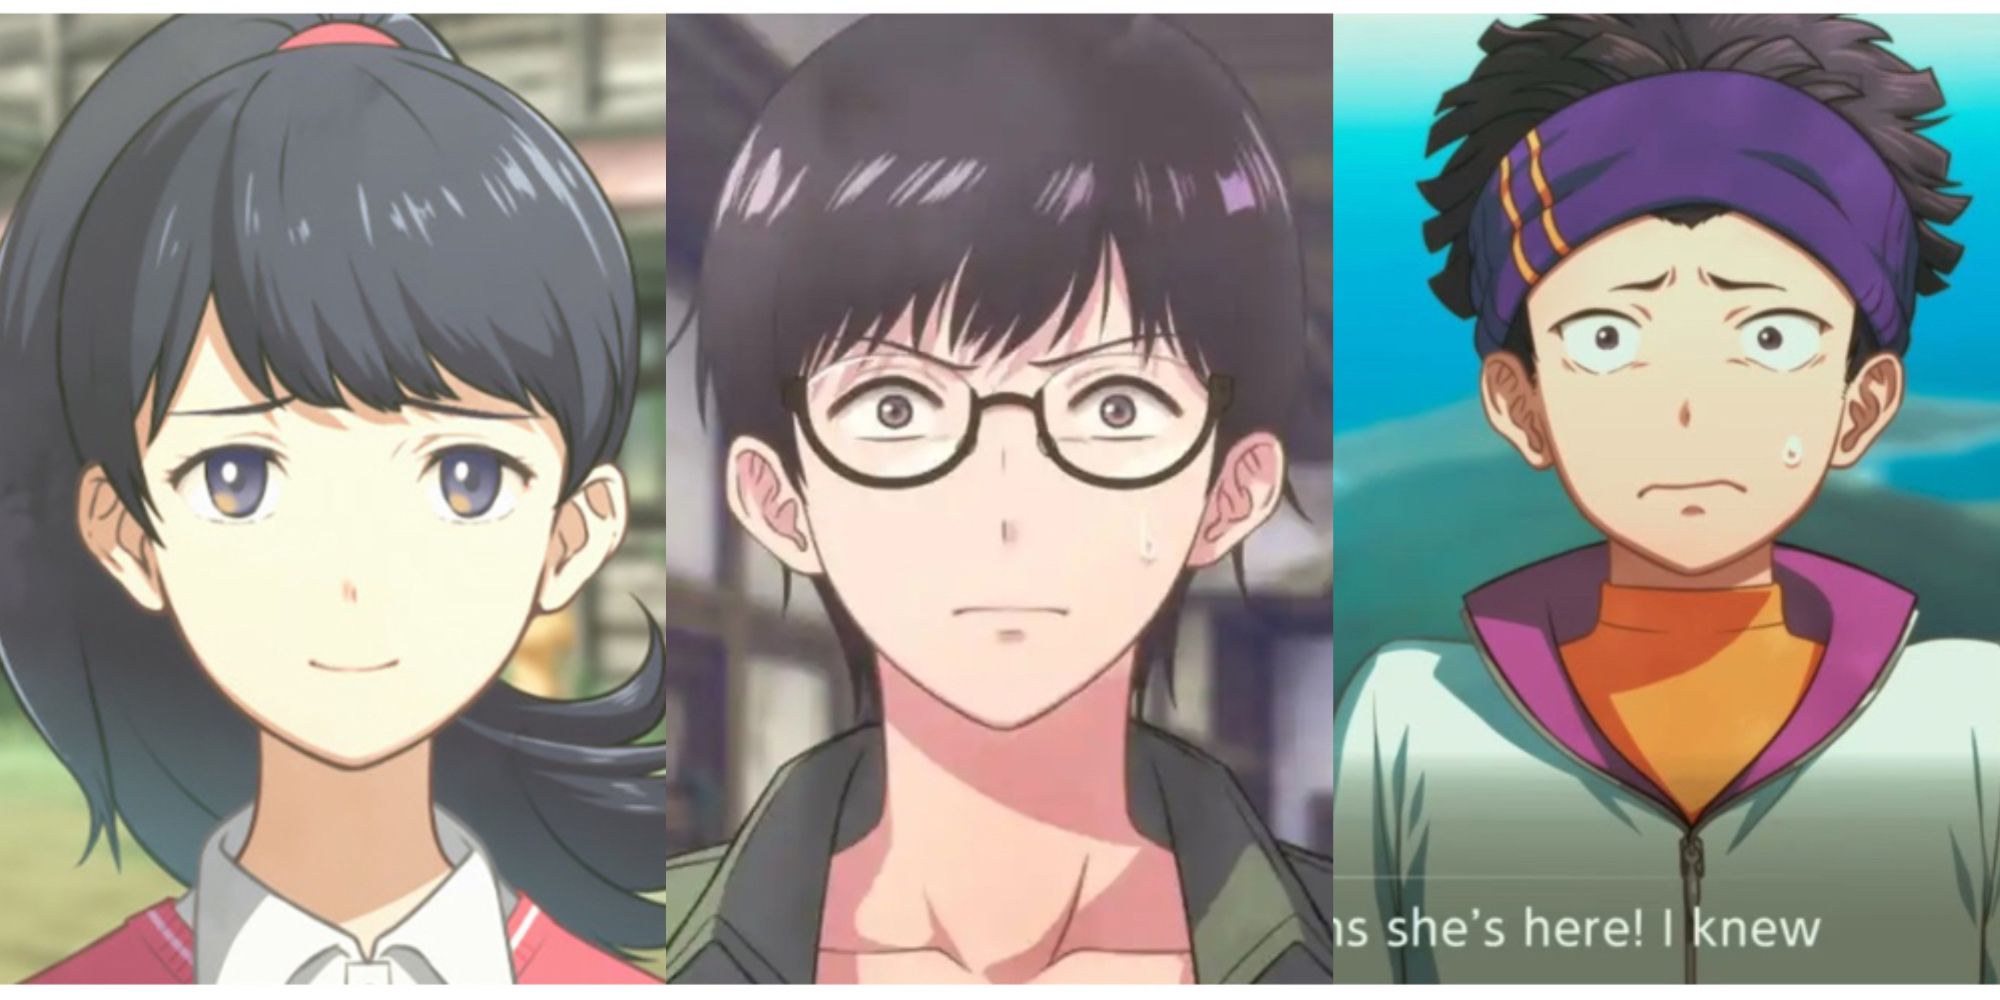 split image of Aoi, Shuuji, and Ryo in Digimon Survive